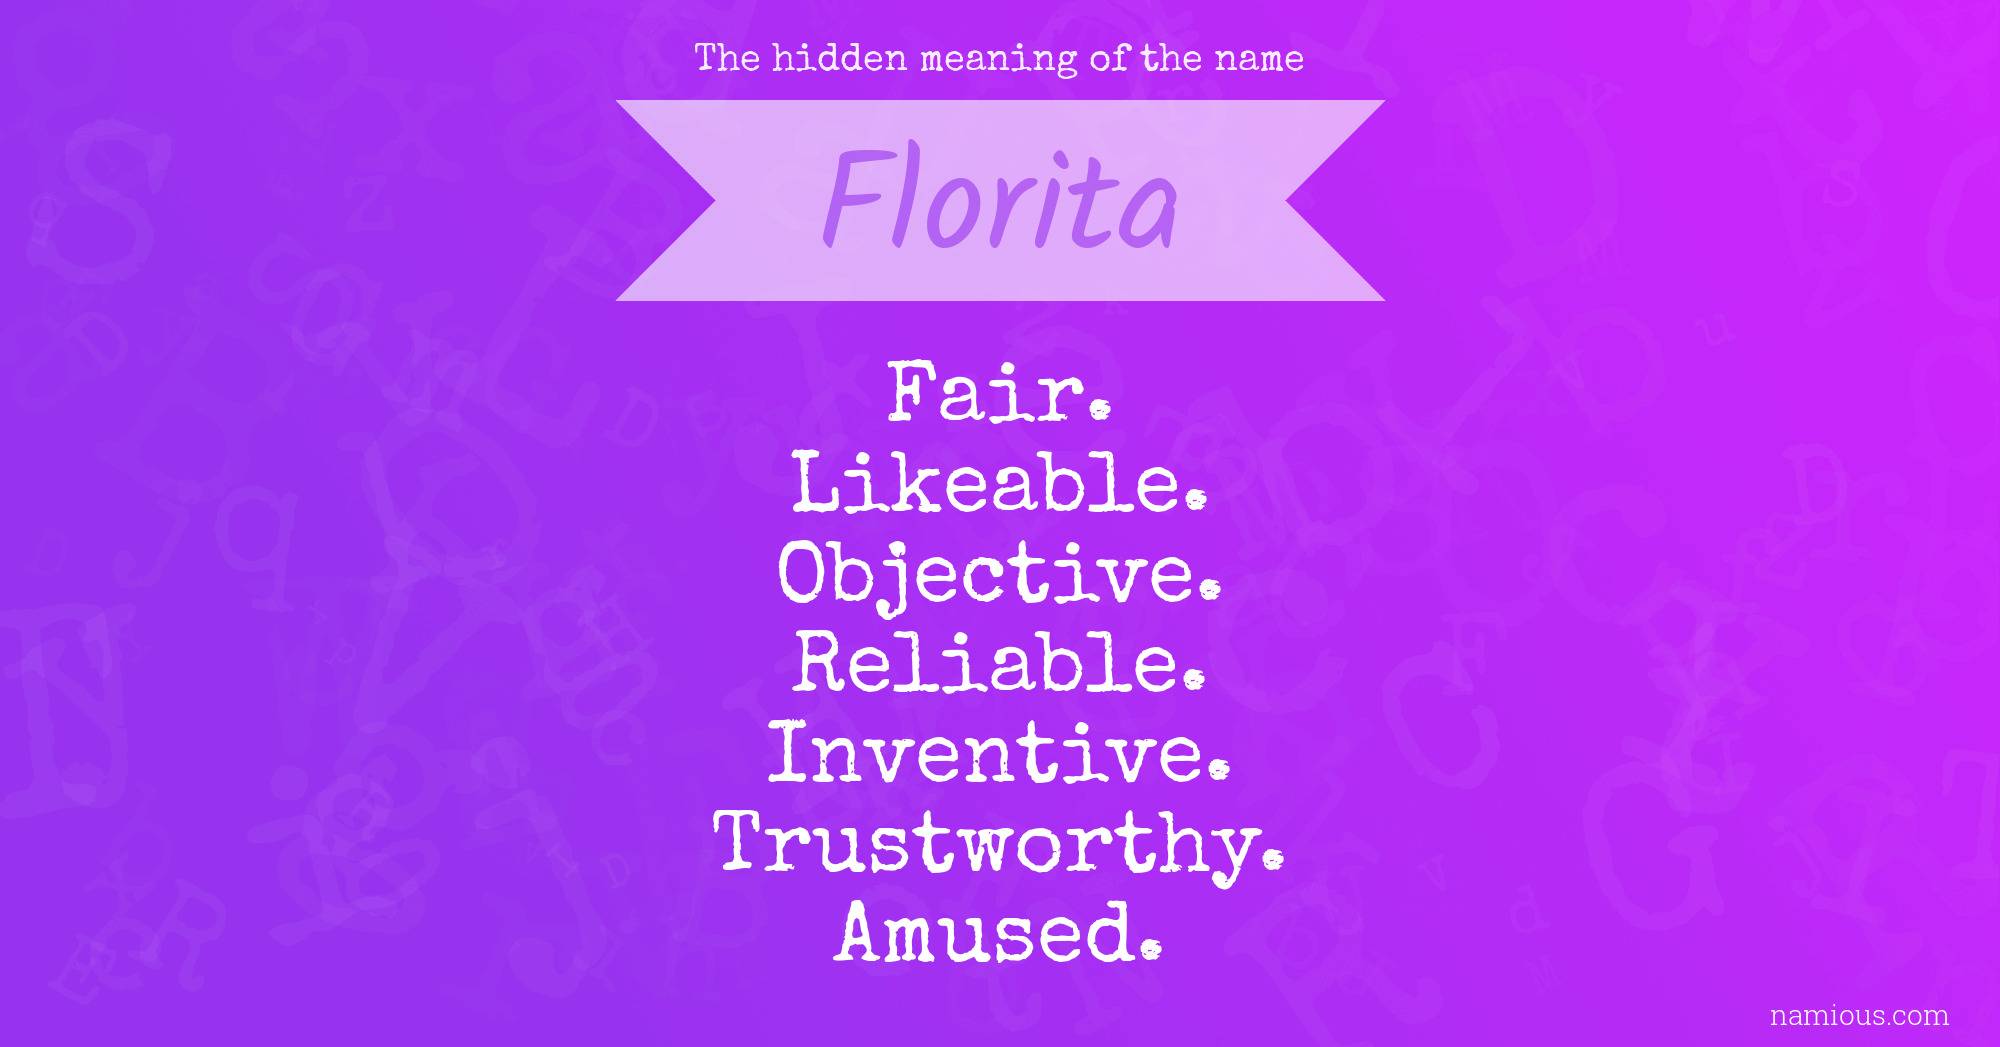 The hidden meaning of the name Florita